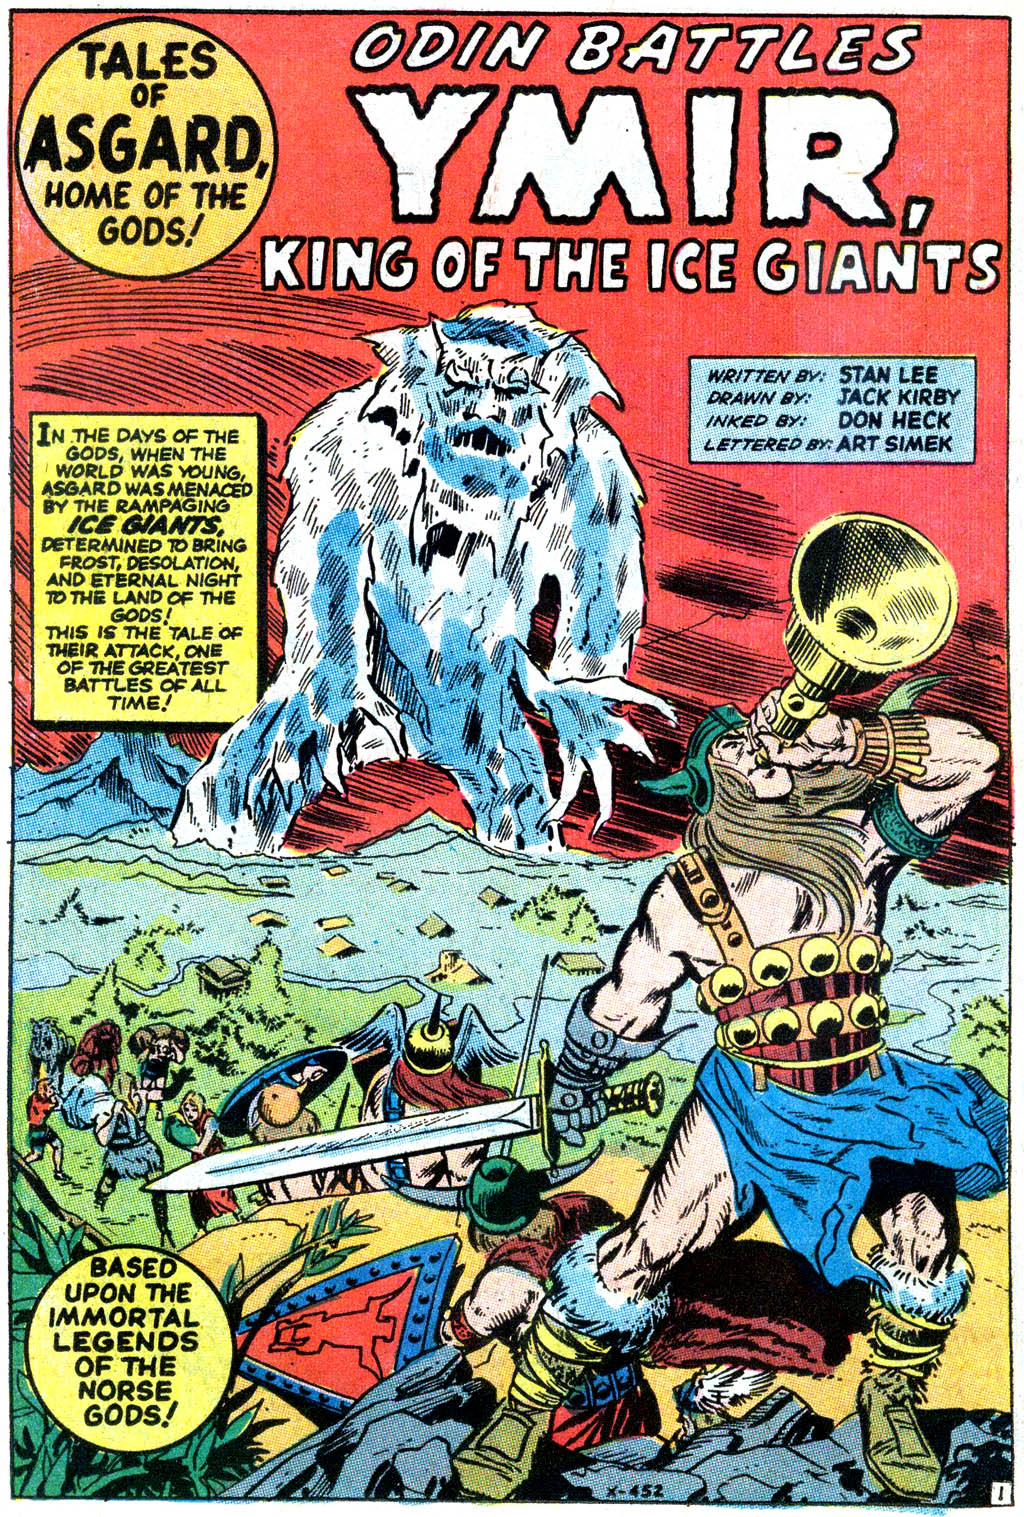 read-online-tales-of-asgard-1968-comic-issue-full